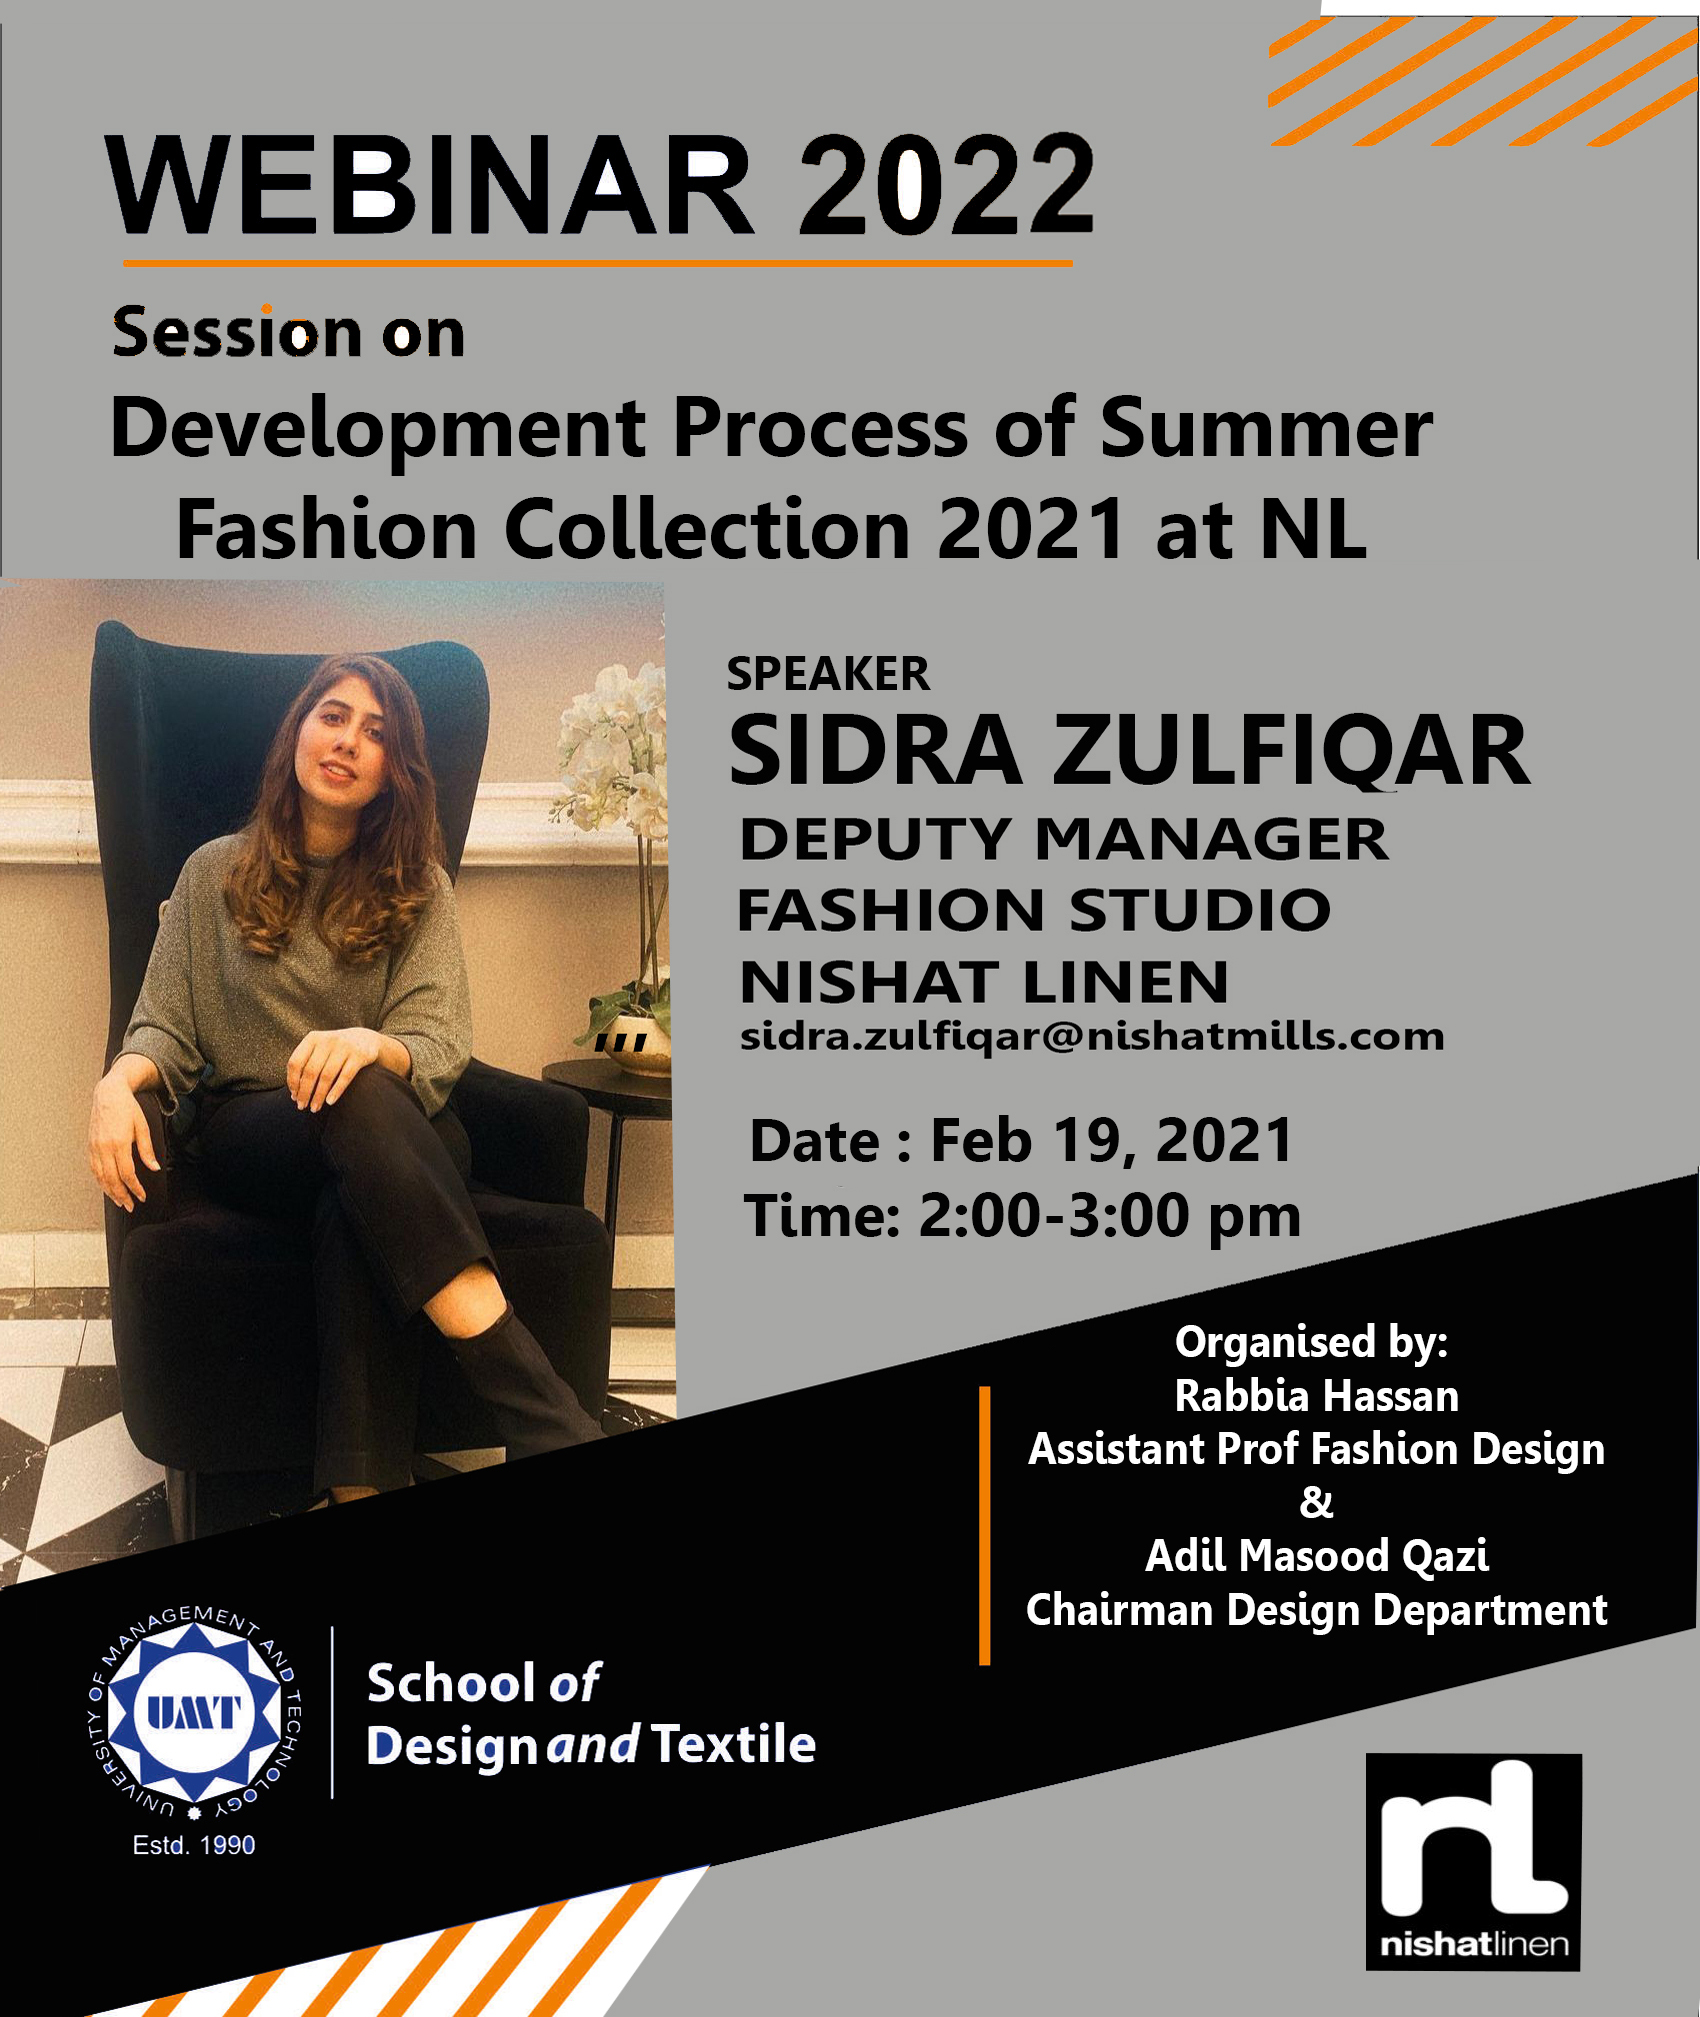 Webinar on Development Process of Summer Fashion Collection 2021 at NL